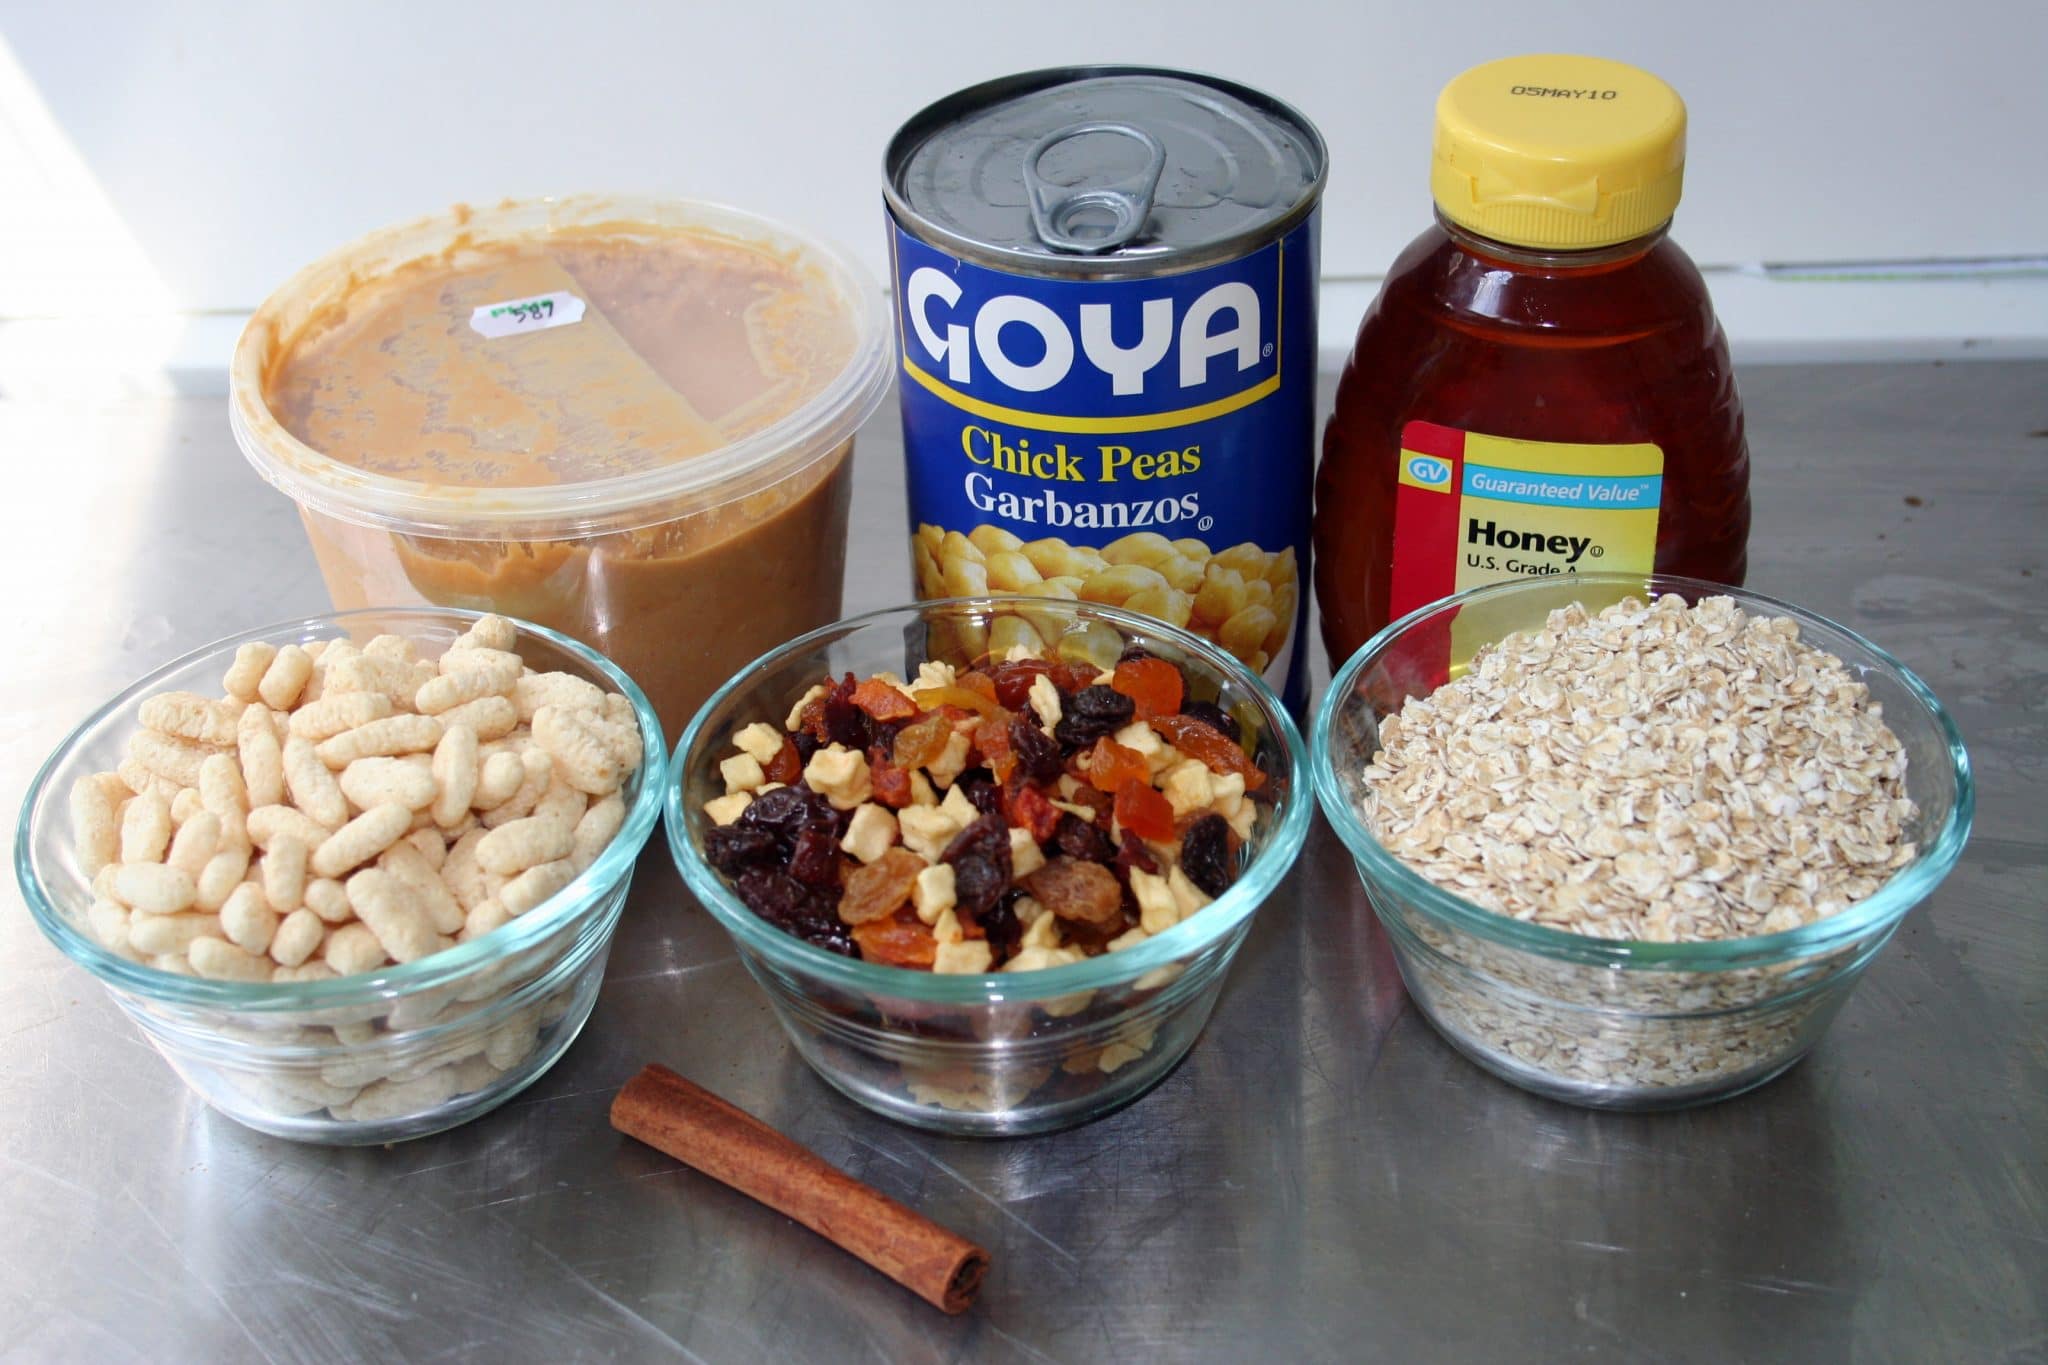 Ingredients to prepare Chickpea Granola Bars: beans, trail mix, oats, beans, peanut butter, and honey